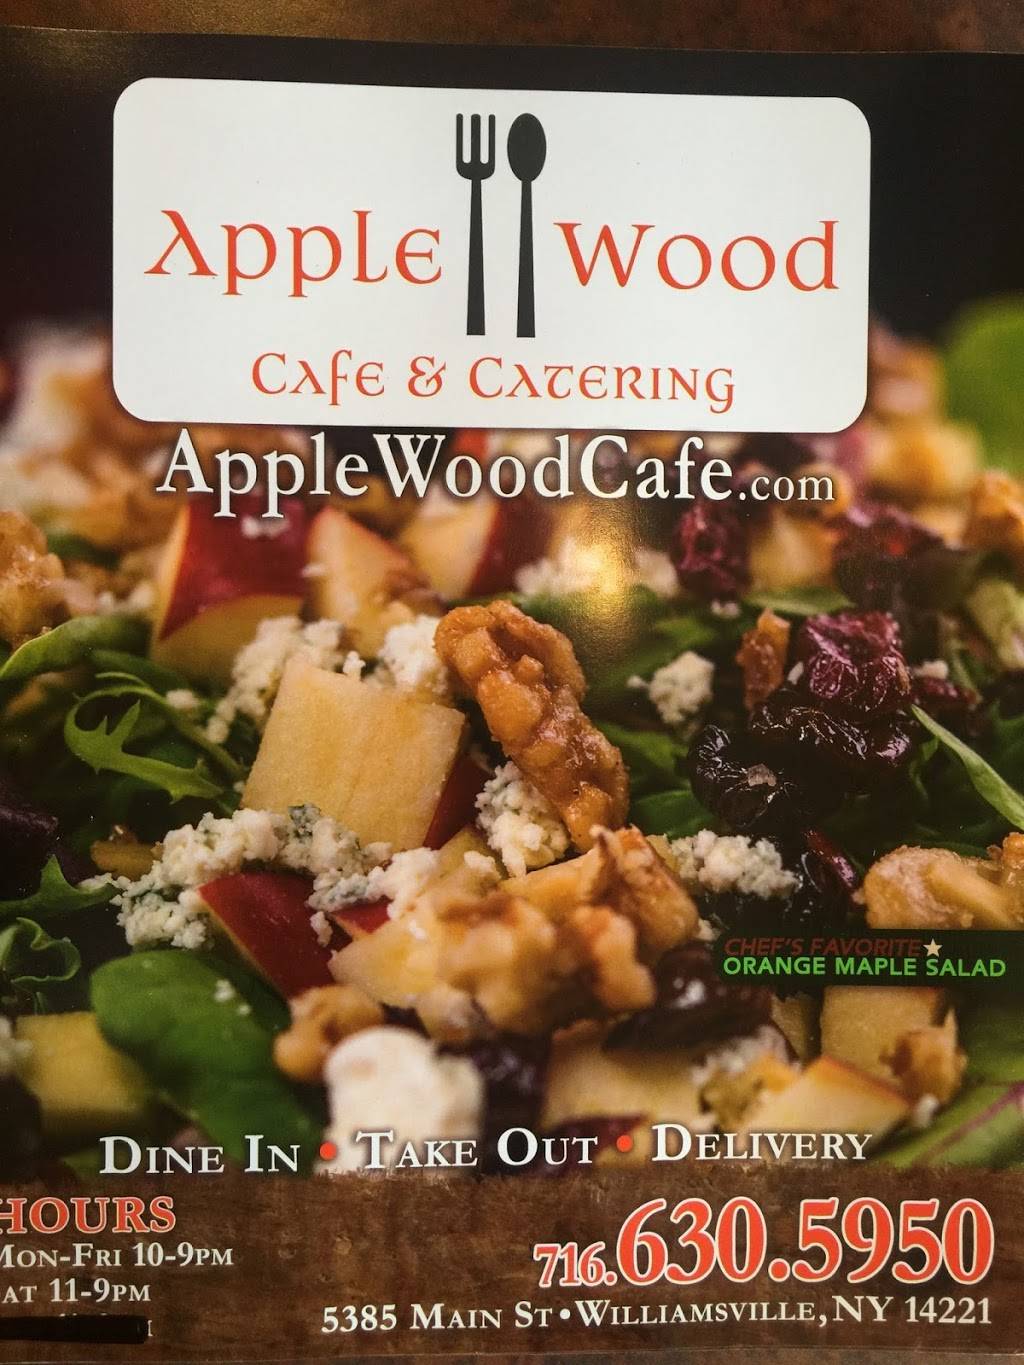 Apple Wood Cafe | cafe | 5385 Main St, Williamsville, NY 14221, USA | 7166305950 OR +1 716-630-5950